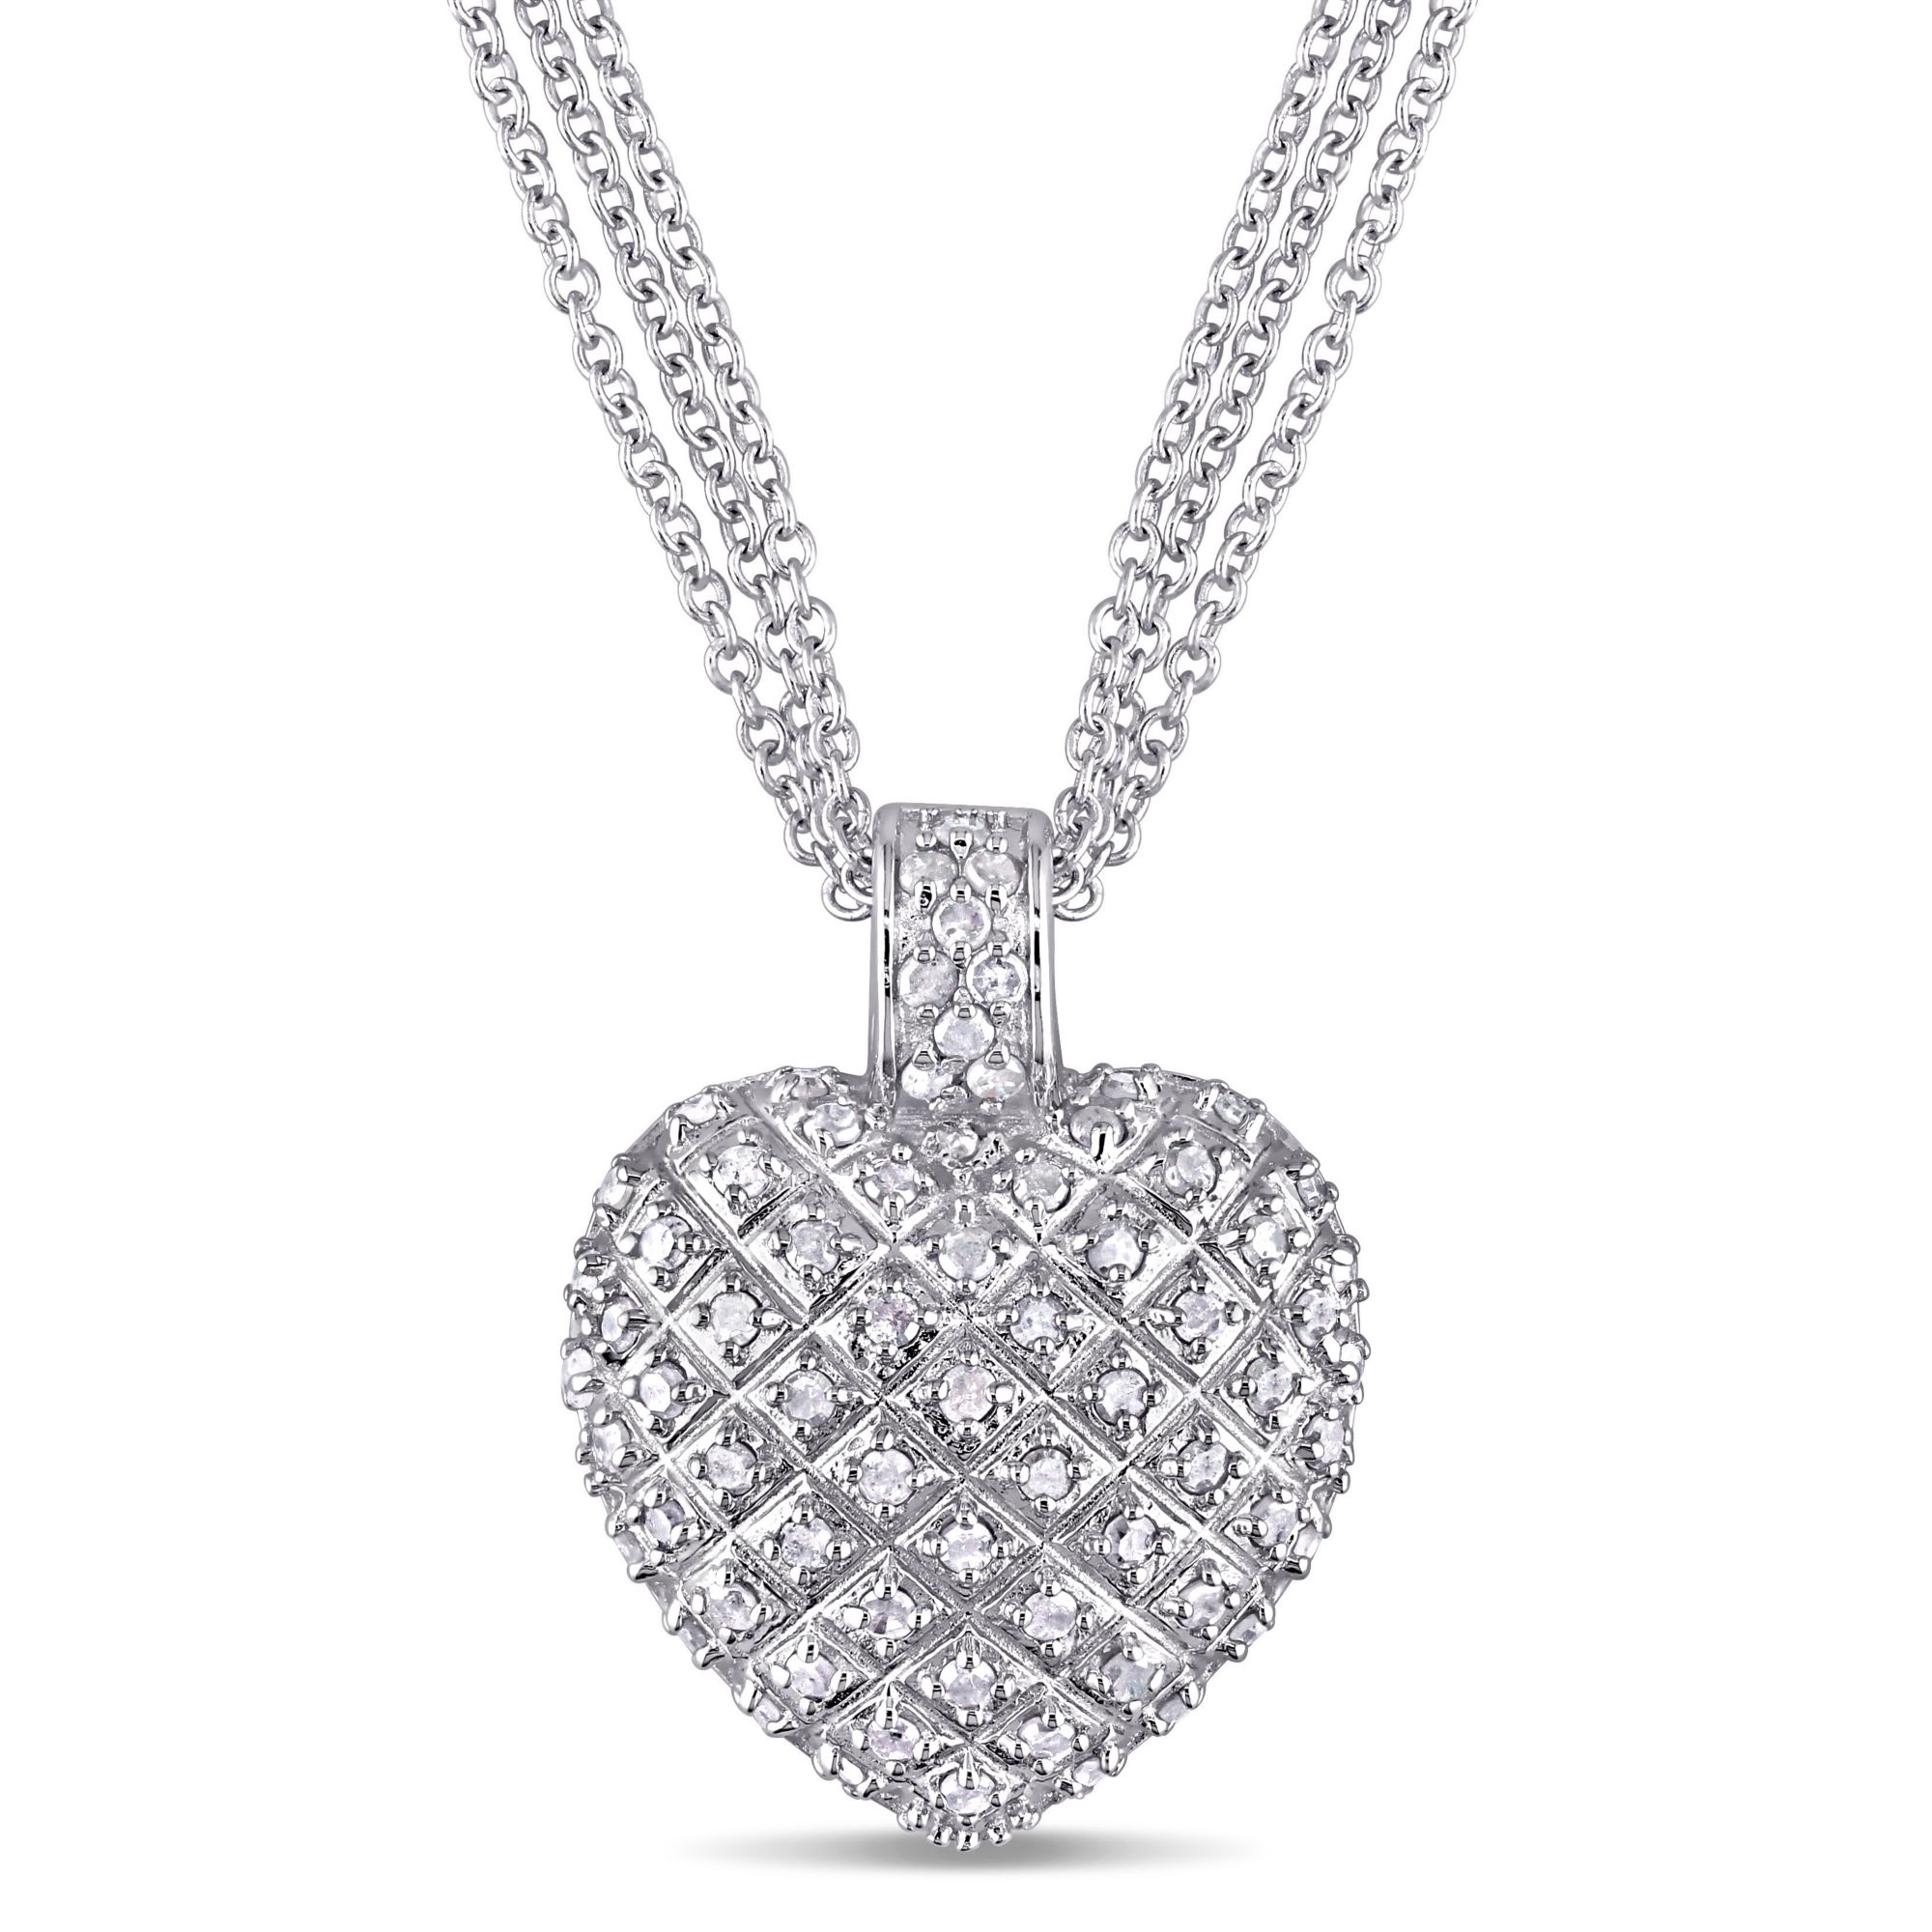 Diamond Heart Pendant Necklace in 14K Yellow Gold, .25 ct. t.w. - 100%  Exclusive